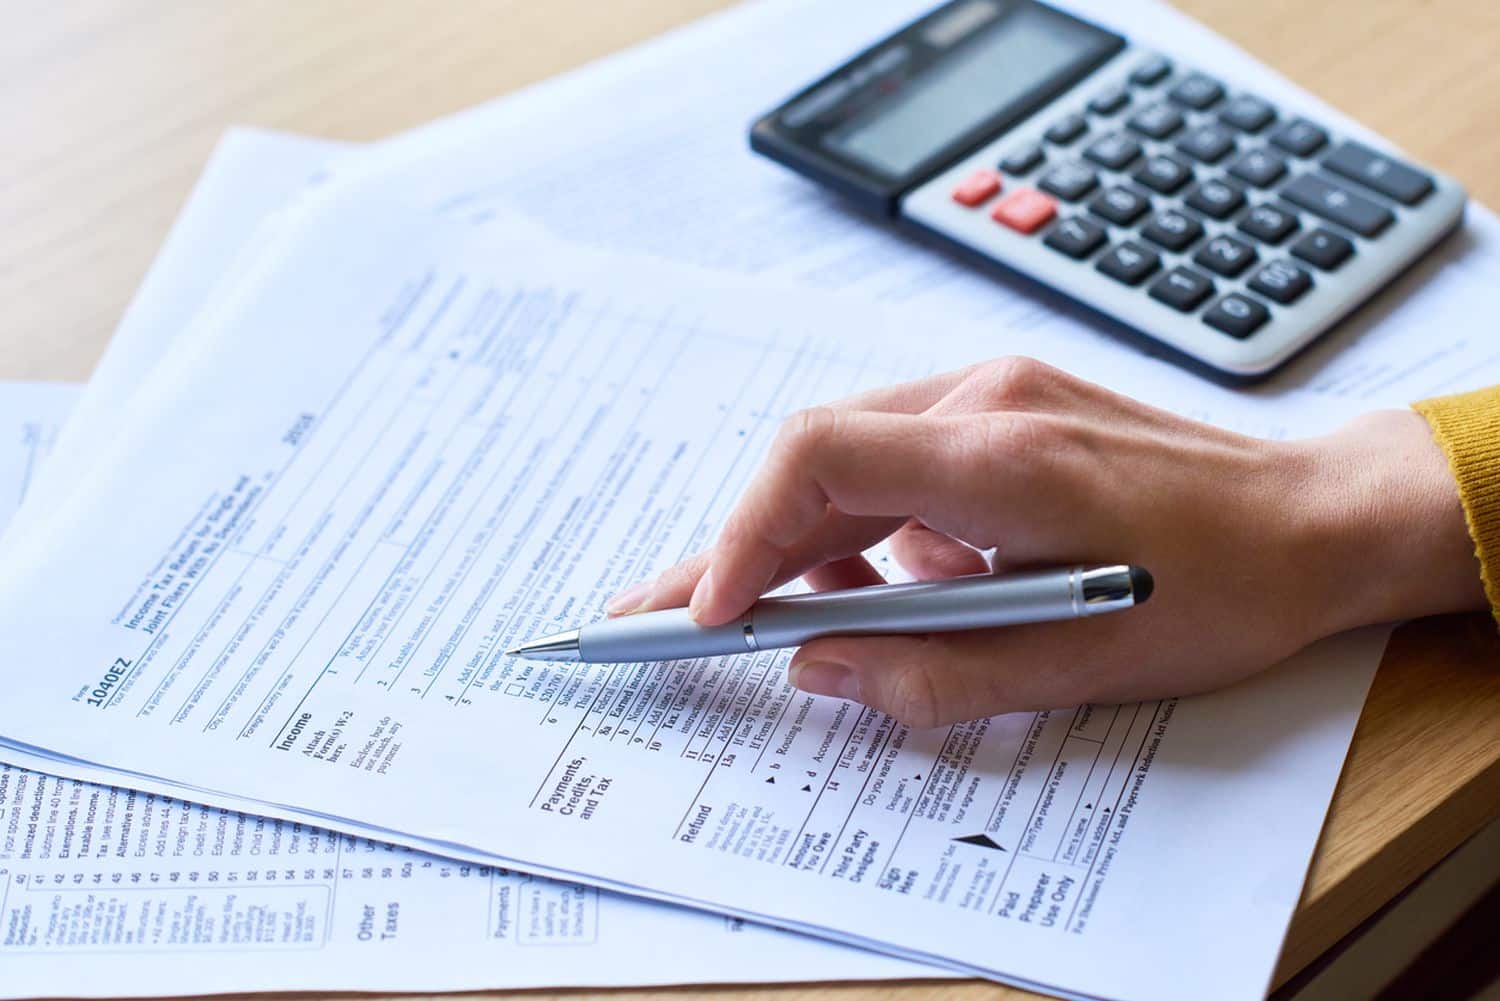 What documents are included in a personal income tax reduction application in Vietnam?